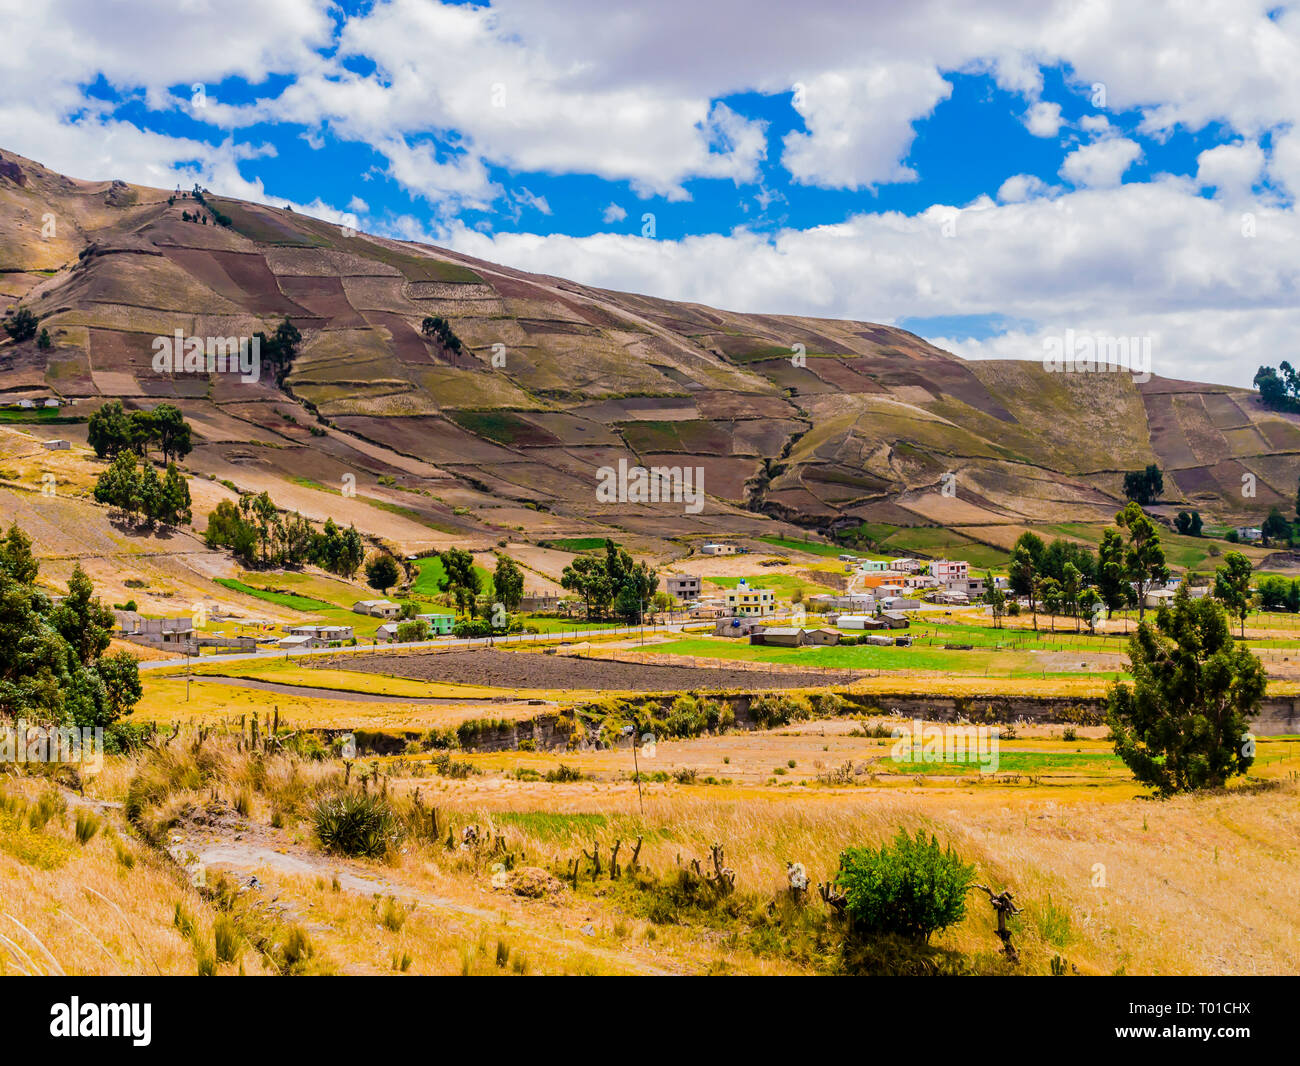 Ecuador, scenic andean landscape between Zumbahua canyon and Quilotoa lagoon with peasant village and cultivated fields Stock Photo